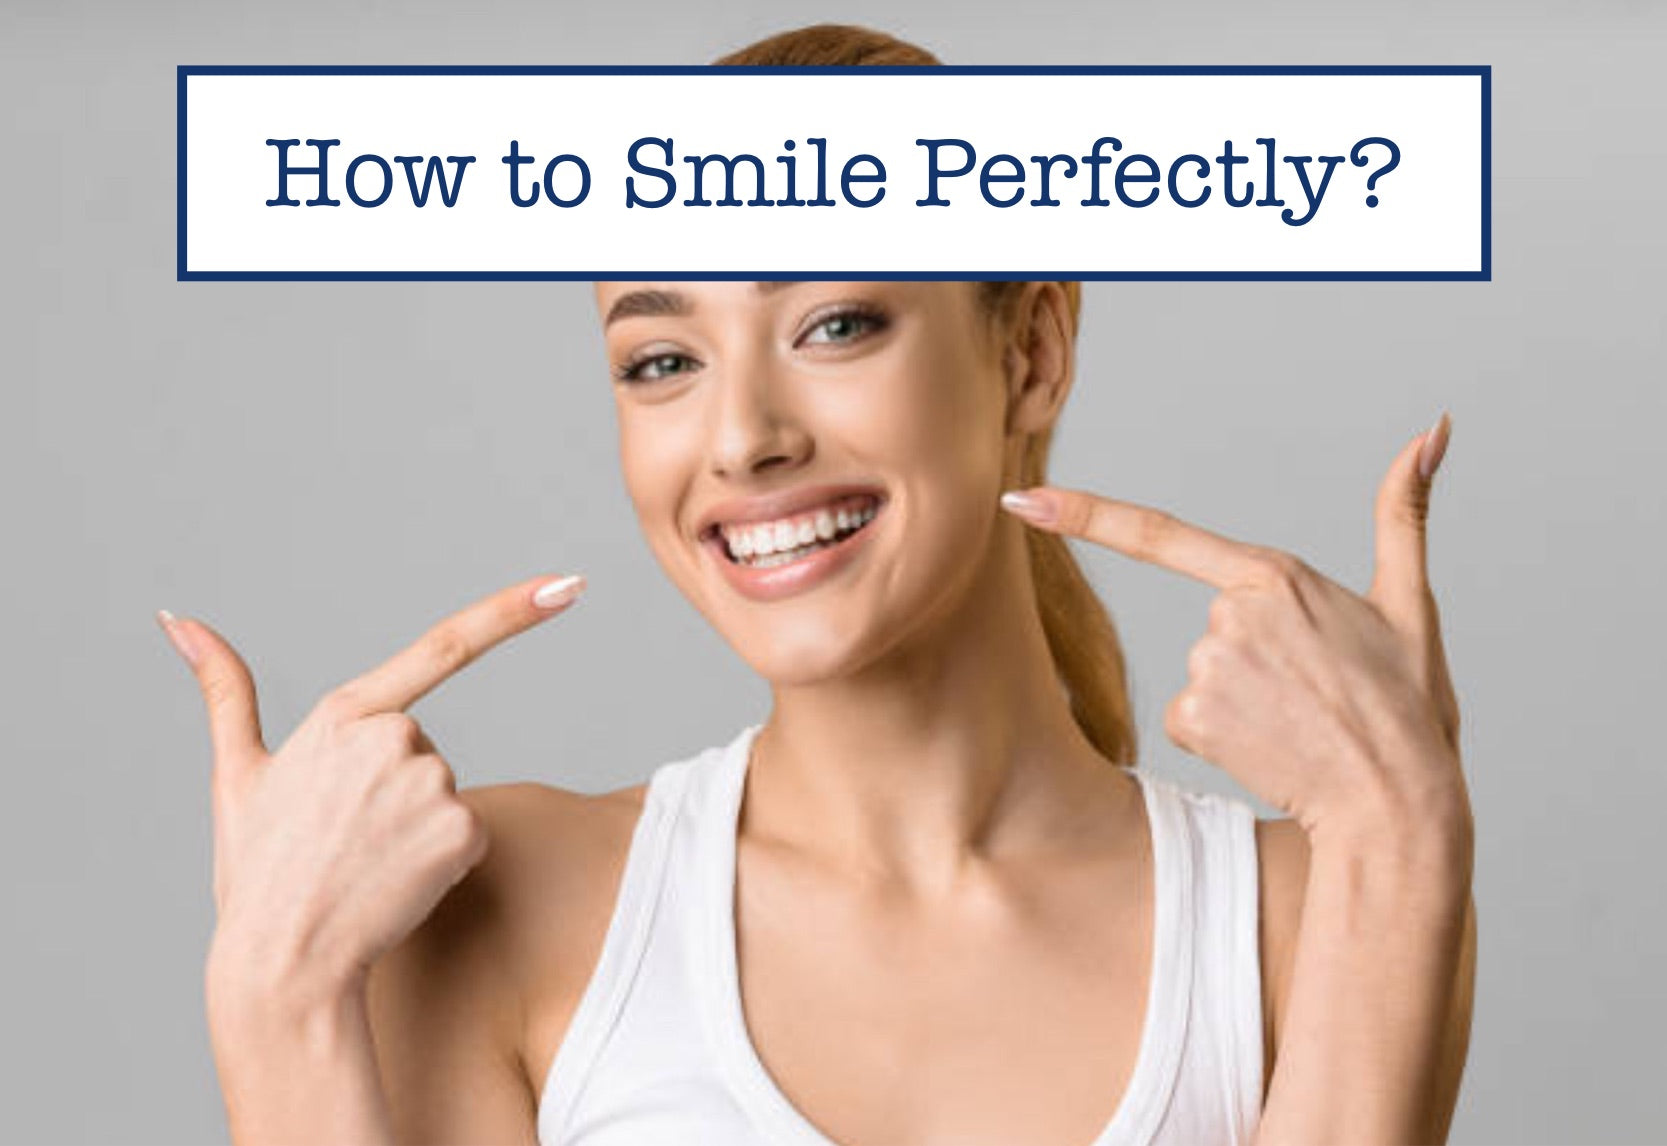 How to Smile Perfectly